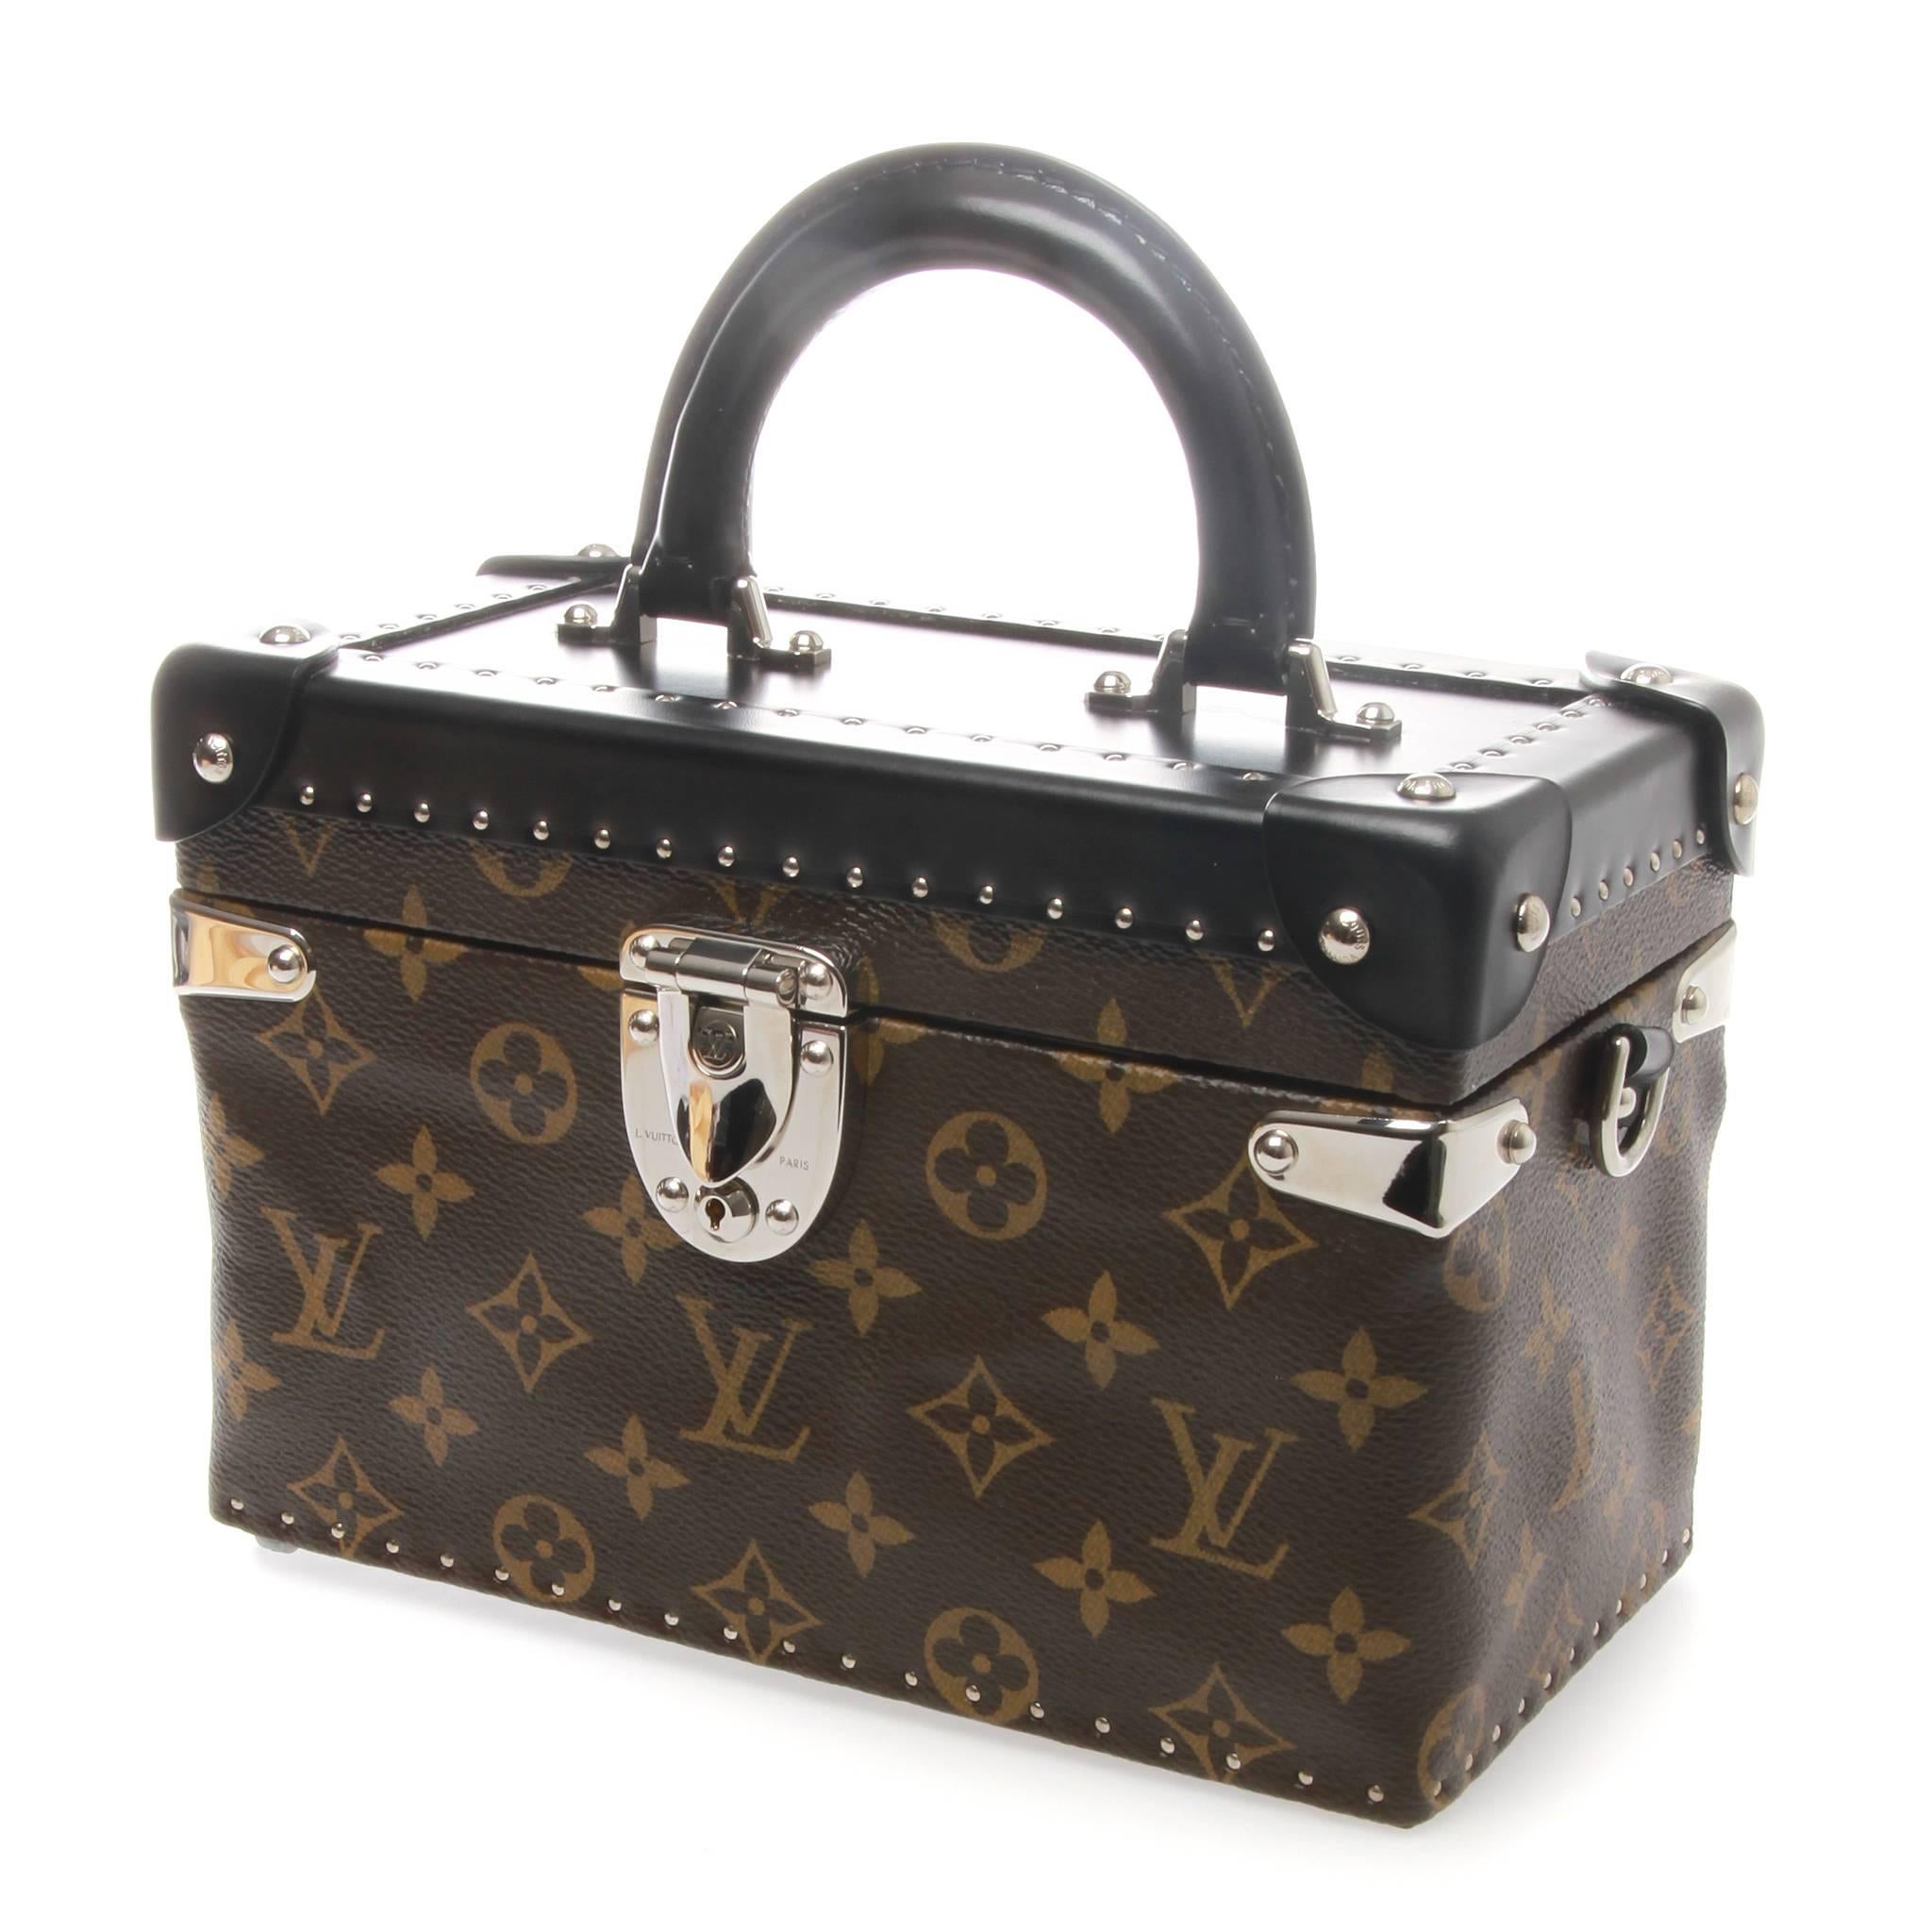 Louis Vuitton City Trunk PM from the Fall 16 ready-to-wear collection. Featuring brown and tan monogram coated canvas, silver-tone hardware, black smooth cowhide trim, single padded top handle, detachable flat shoulder strap, stud embellishments